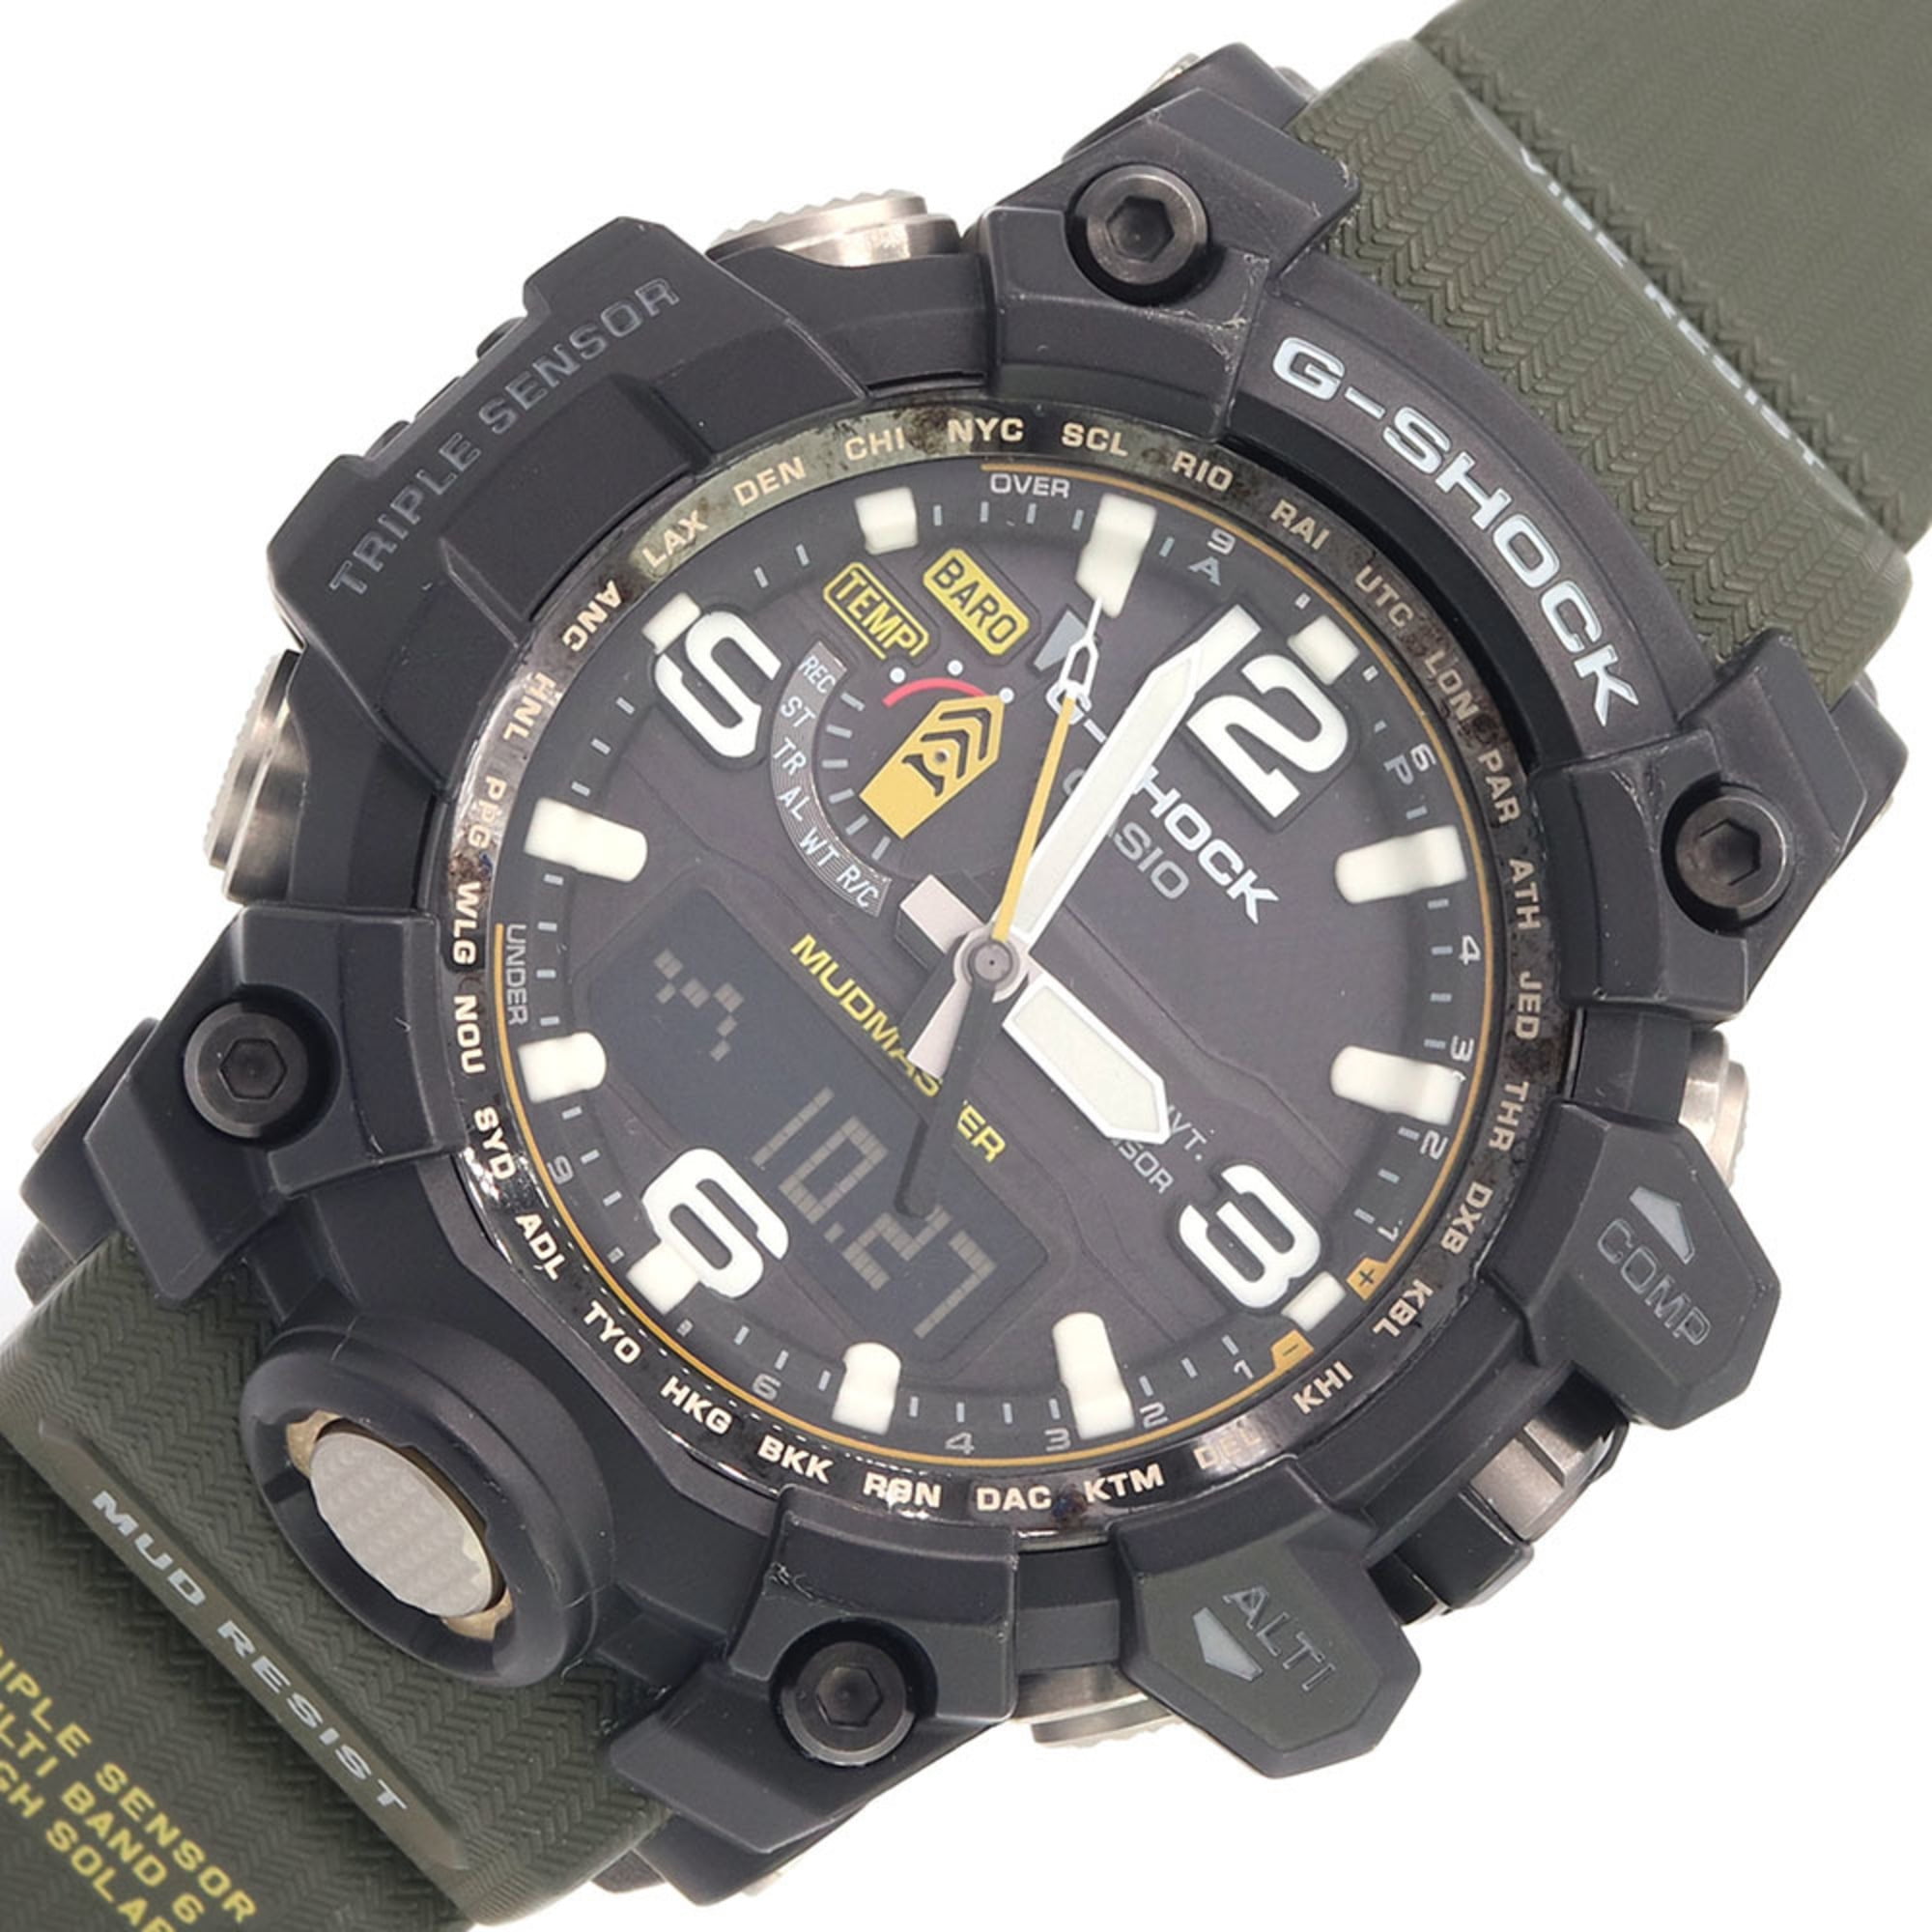 Used Casio Men's Watch G-Shock Madmaster GWG-1000-1A3JF Black Dial